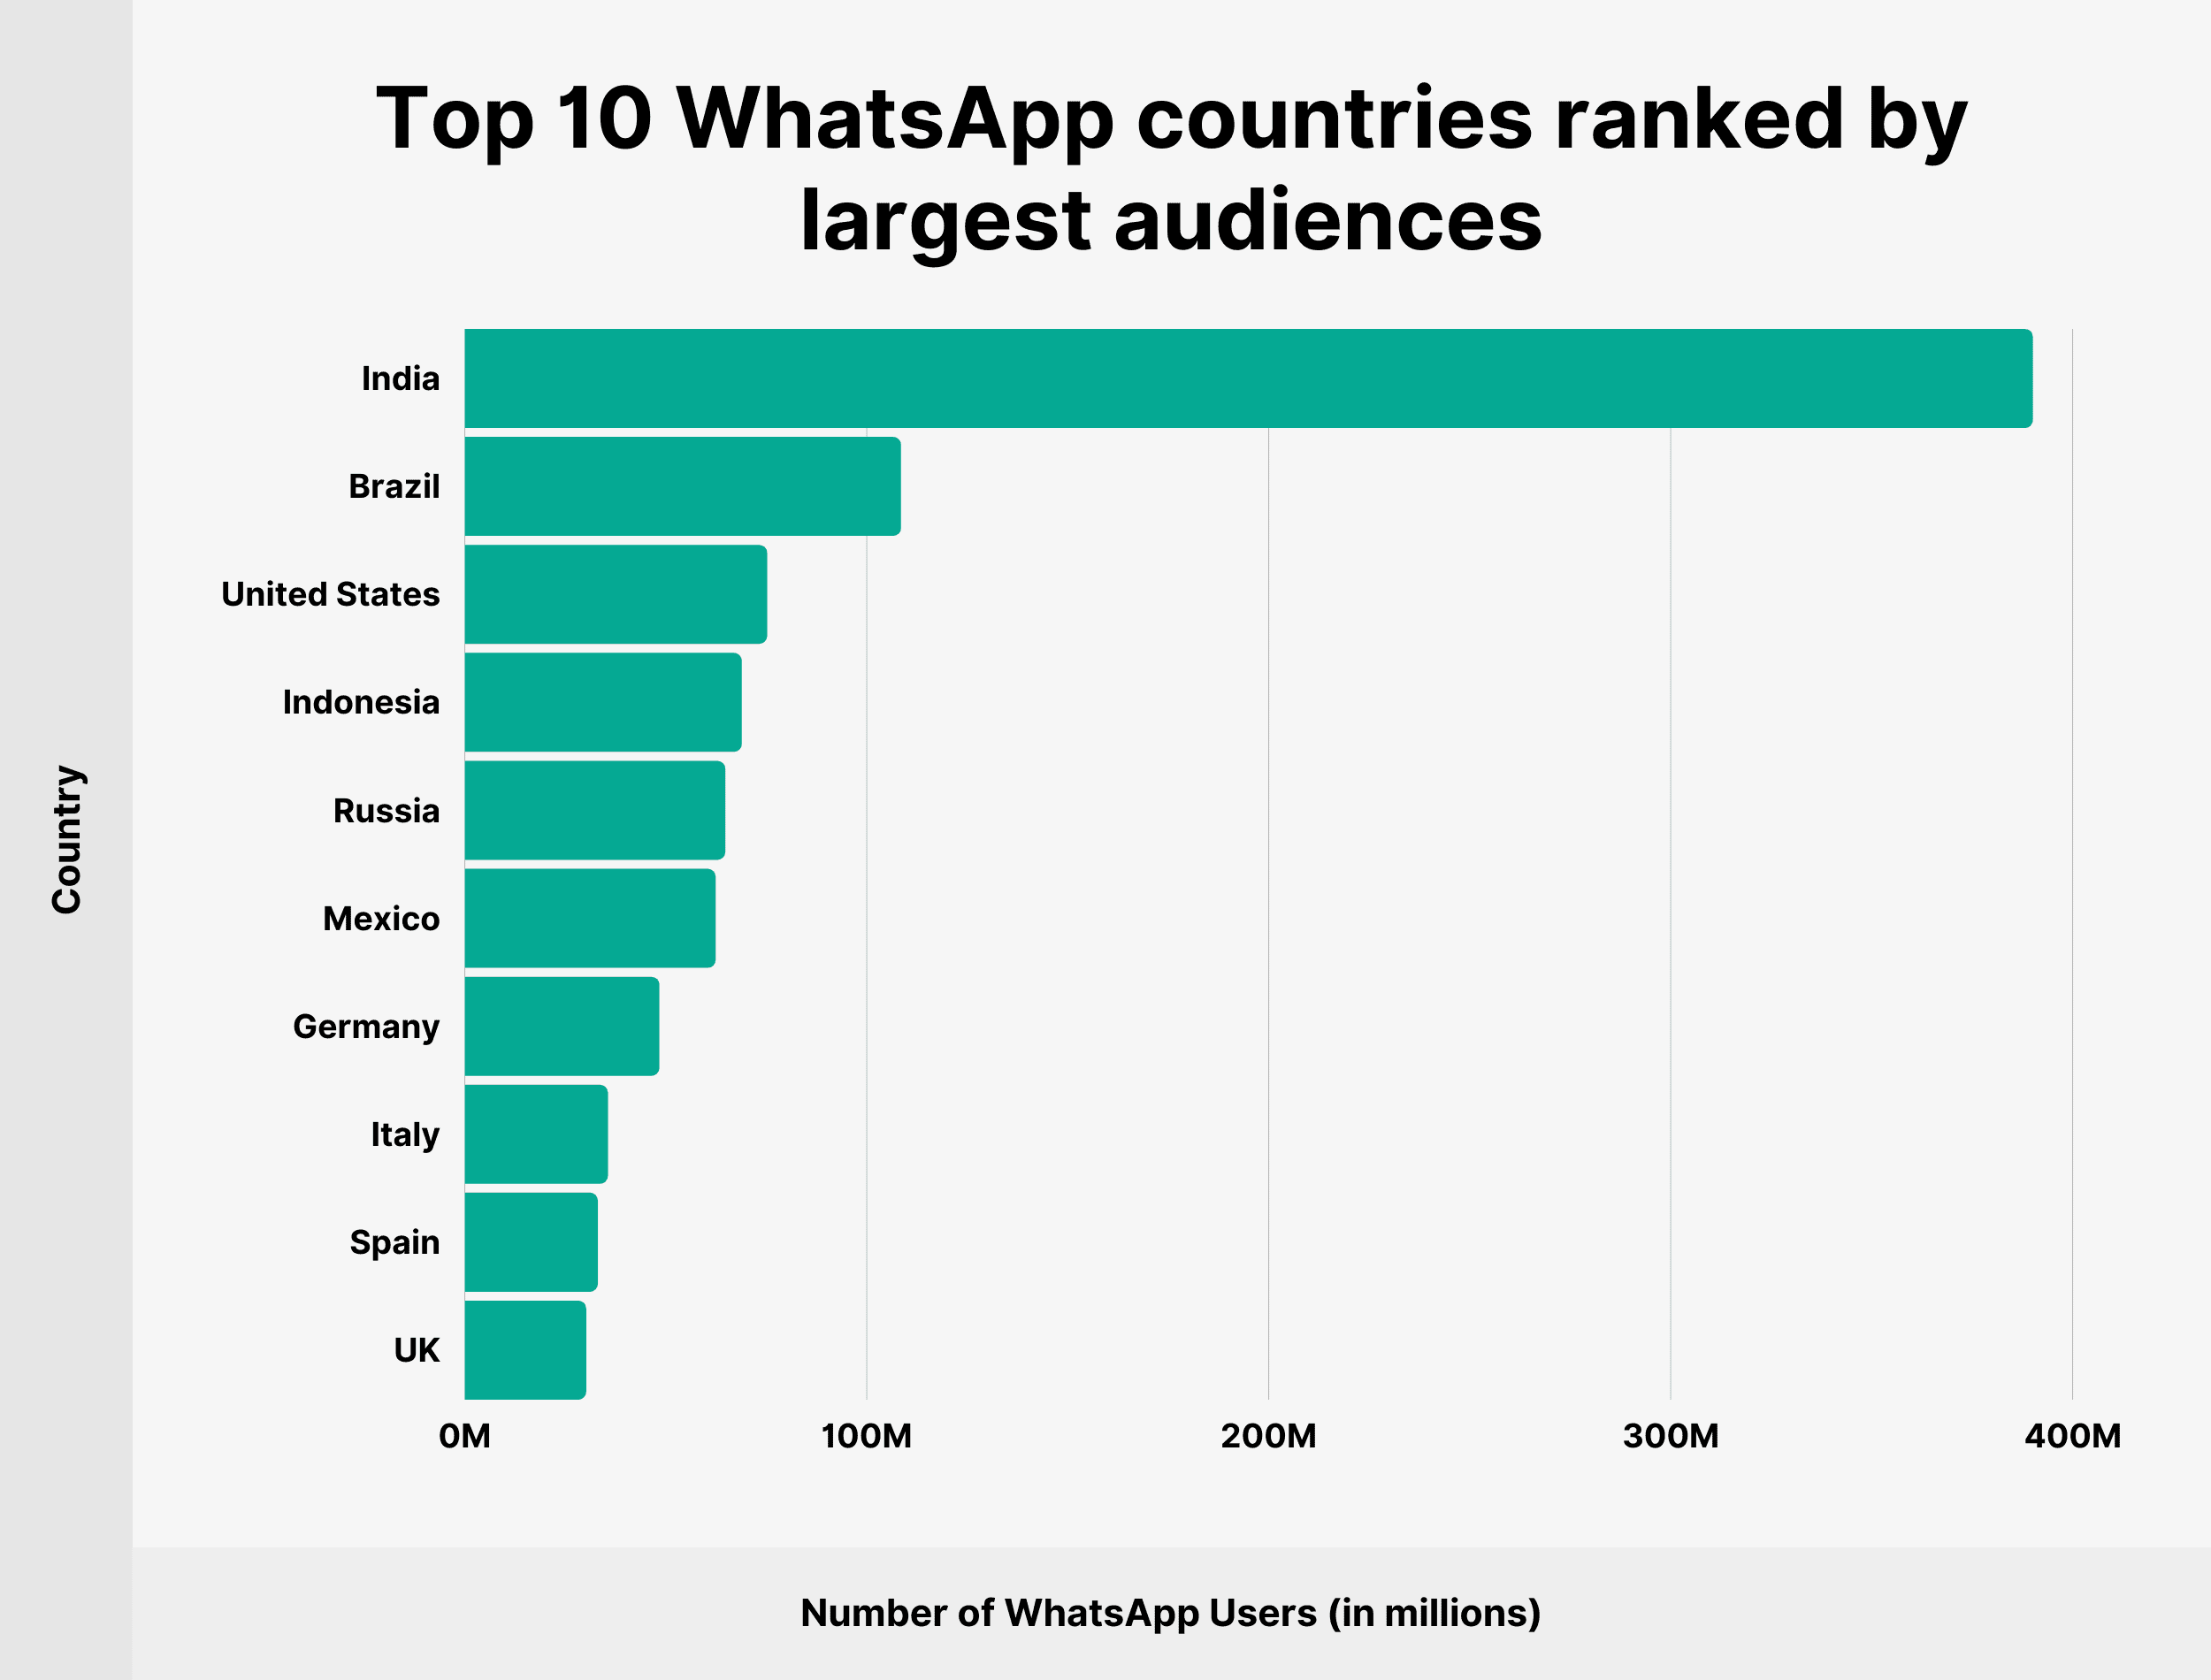 Top 10 WhatsApp countries ranked by largest audiences